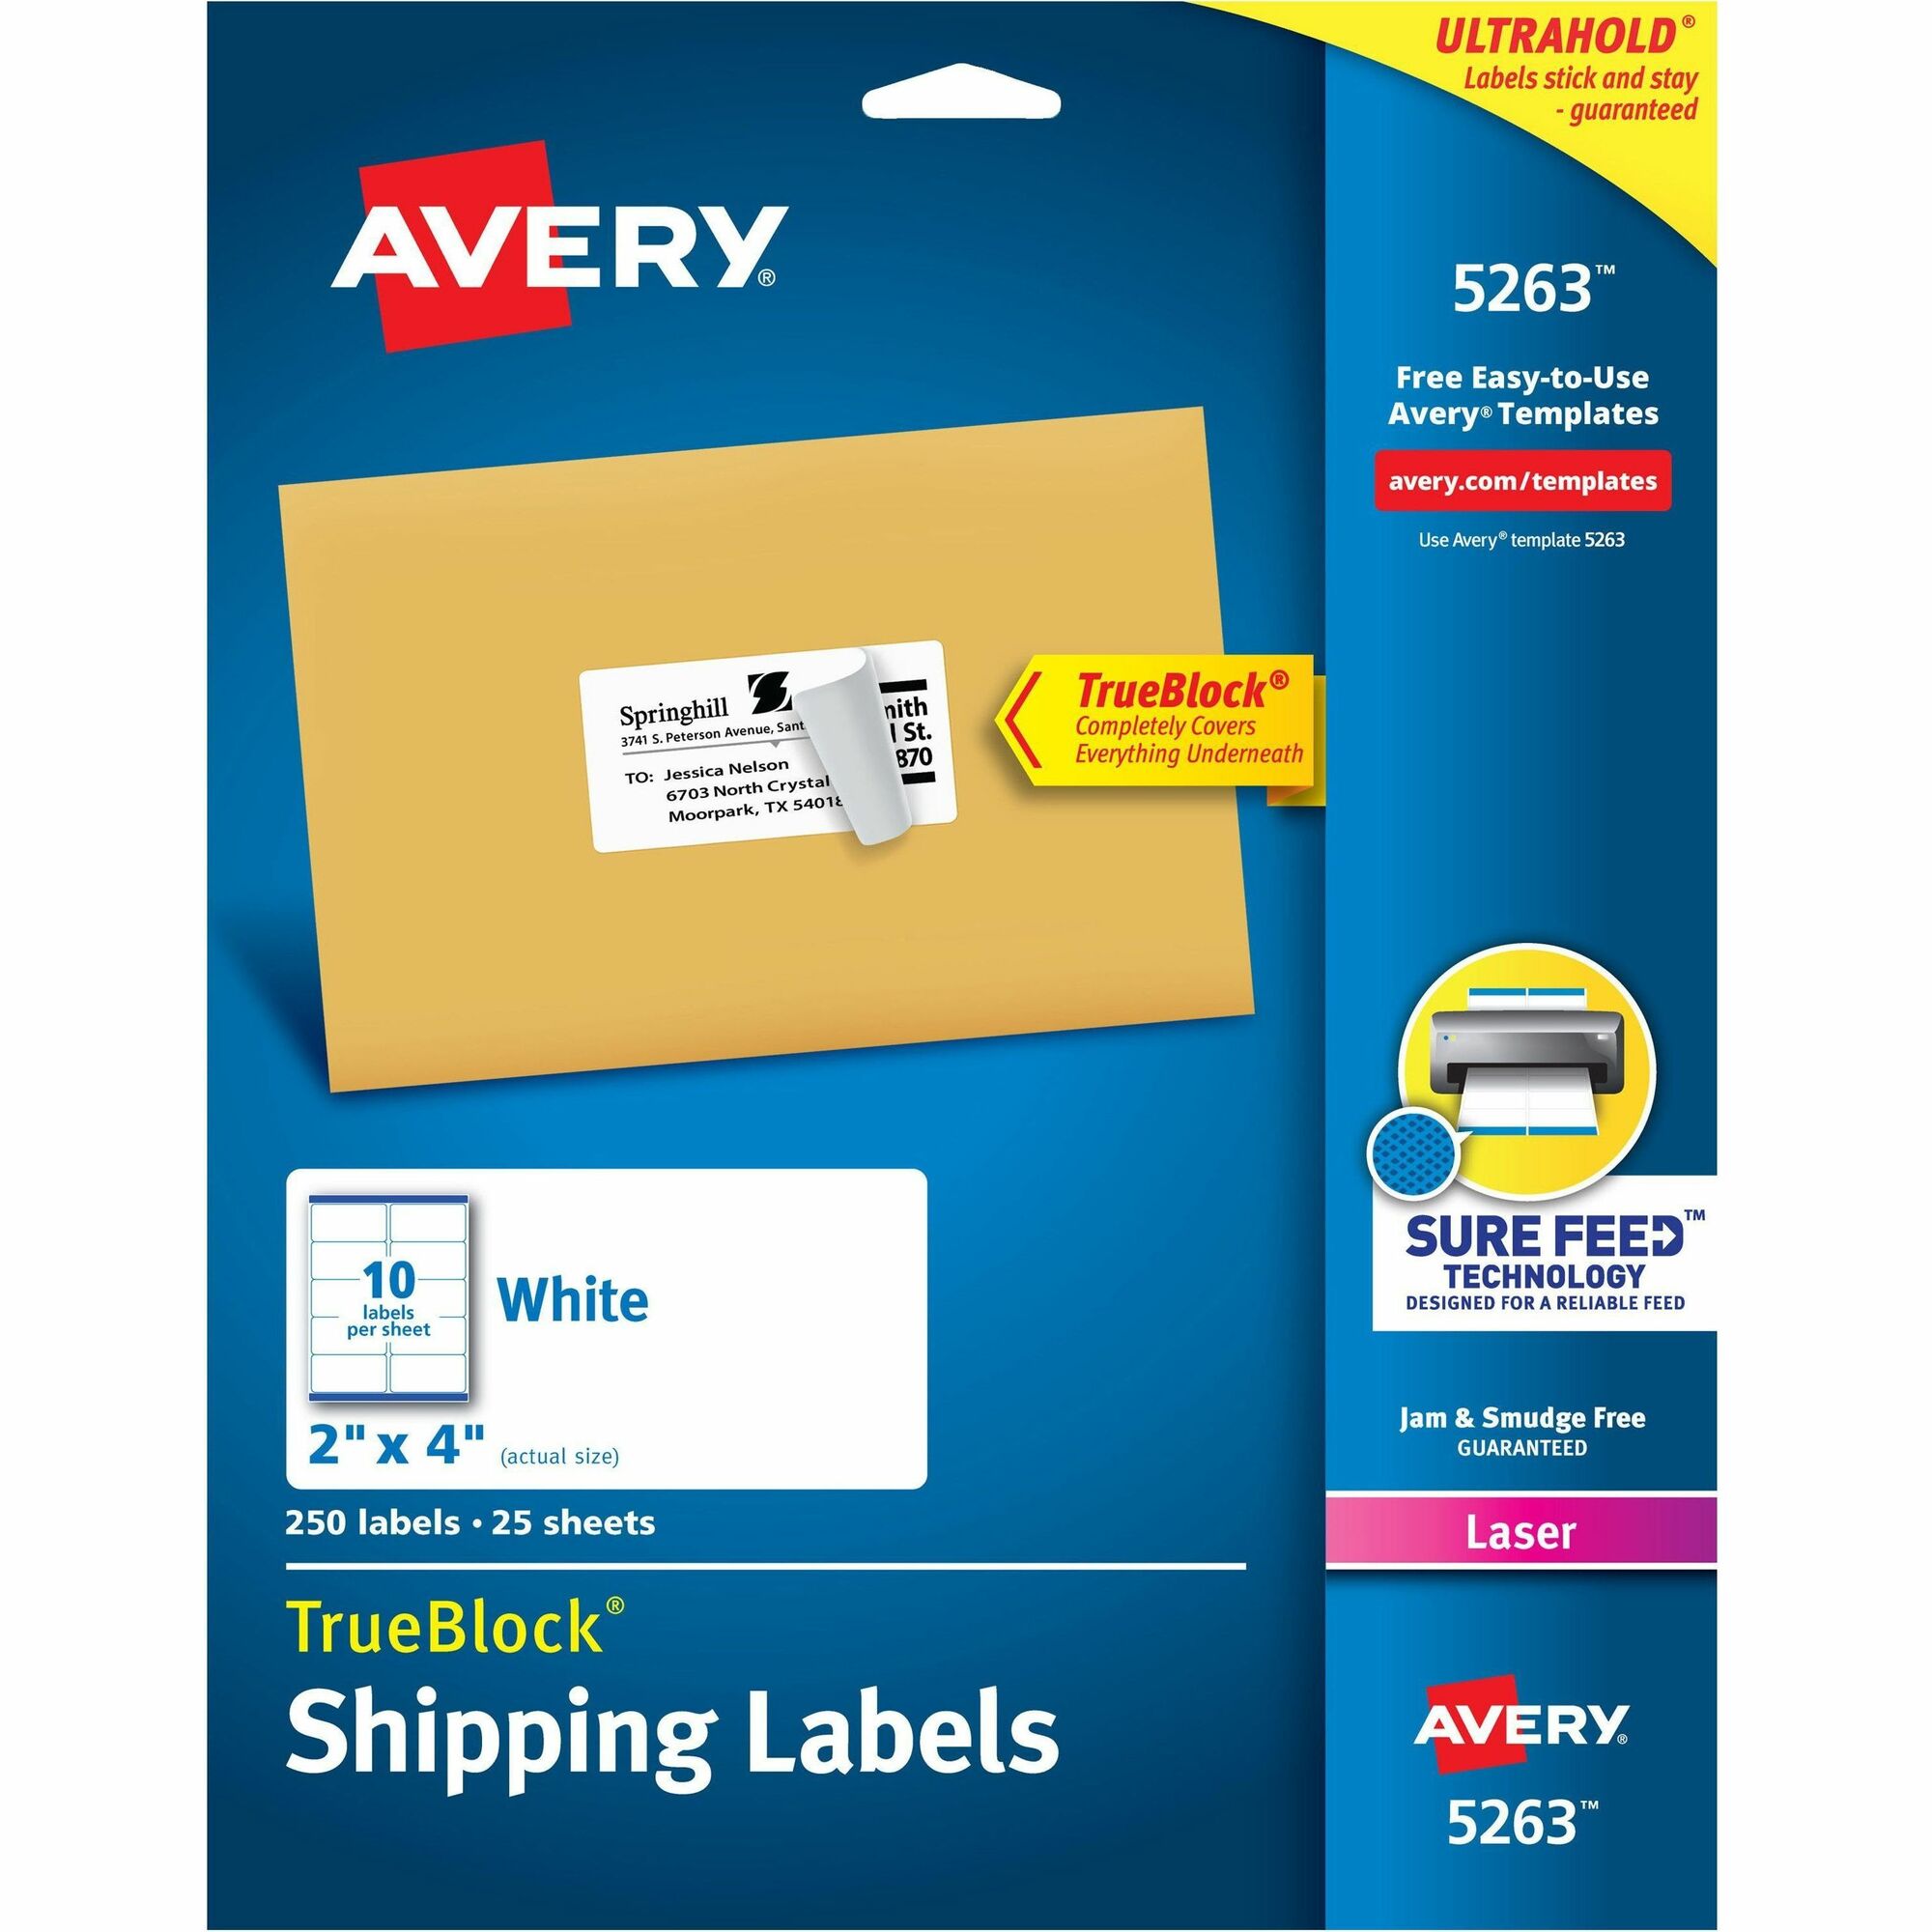 avery-label-template-8163